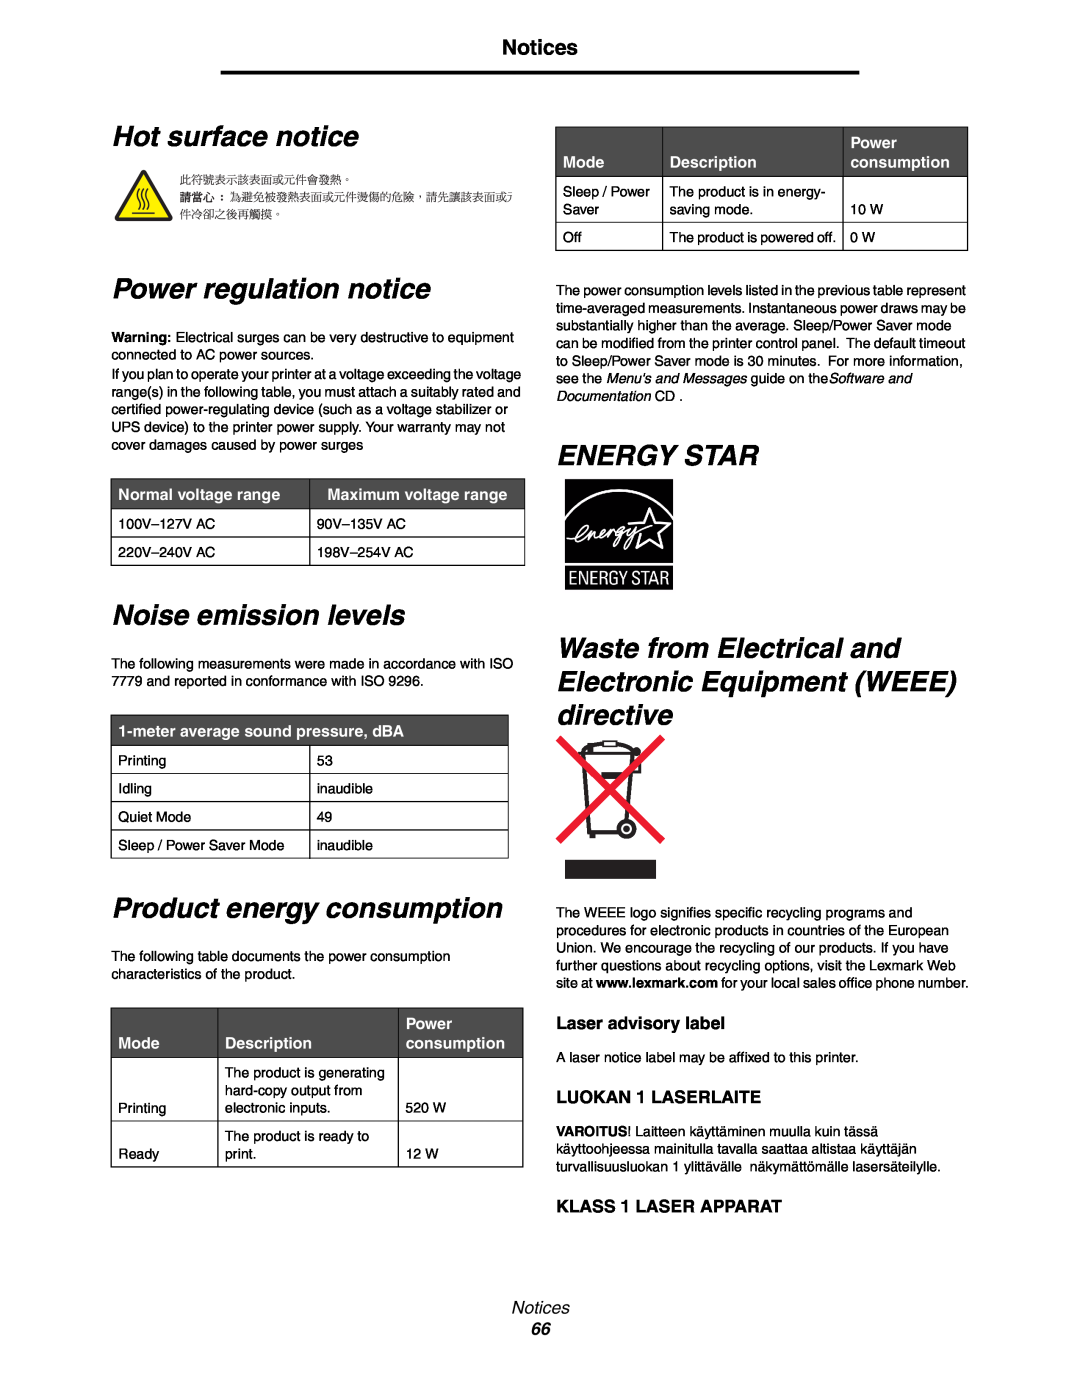 Lexmark 450dn Hot surface notice, Power regulation notice, Energy Star, Noise emission levels Waste from Electrical and 